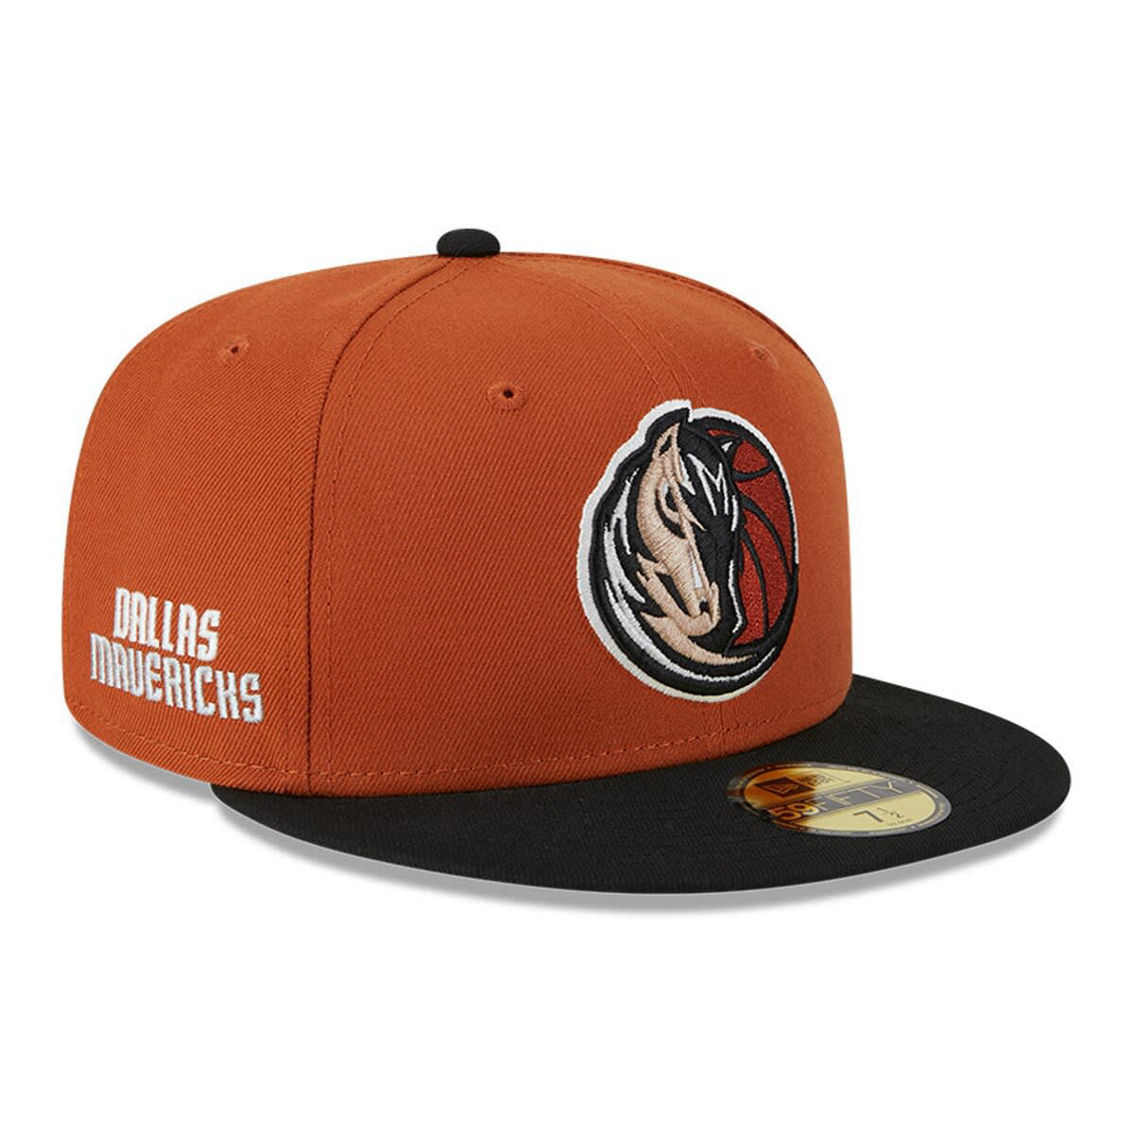 New Era Men's Rust/Black Dallas Mavericks Two-Tone 59FIFTY Fitted Hat - Image 2 of 4